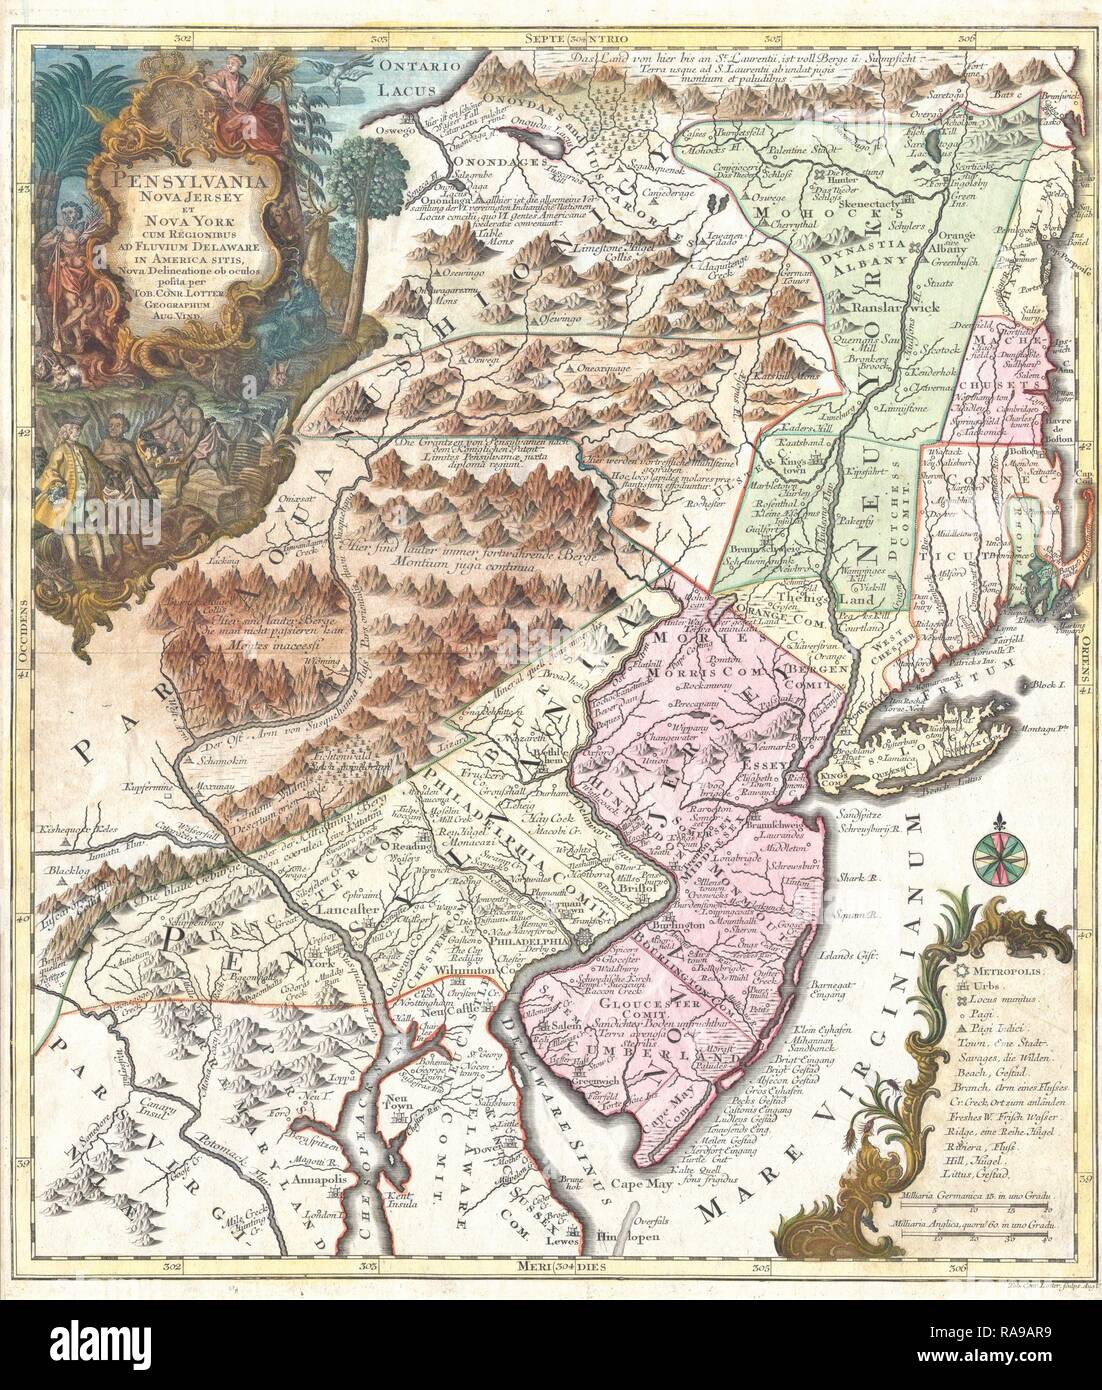 1756, Lotter Map of Pennsylvania, New Jersey and New York. Reimagined by Gibon. Classic art with a modern twist reimagined Stock Photo